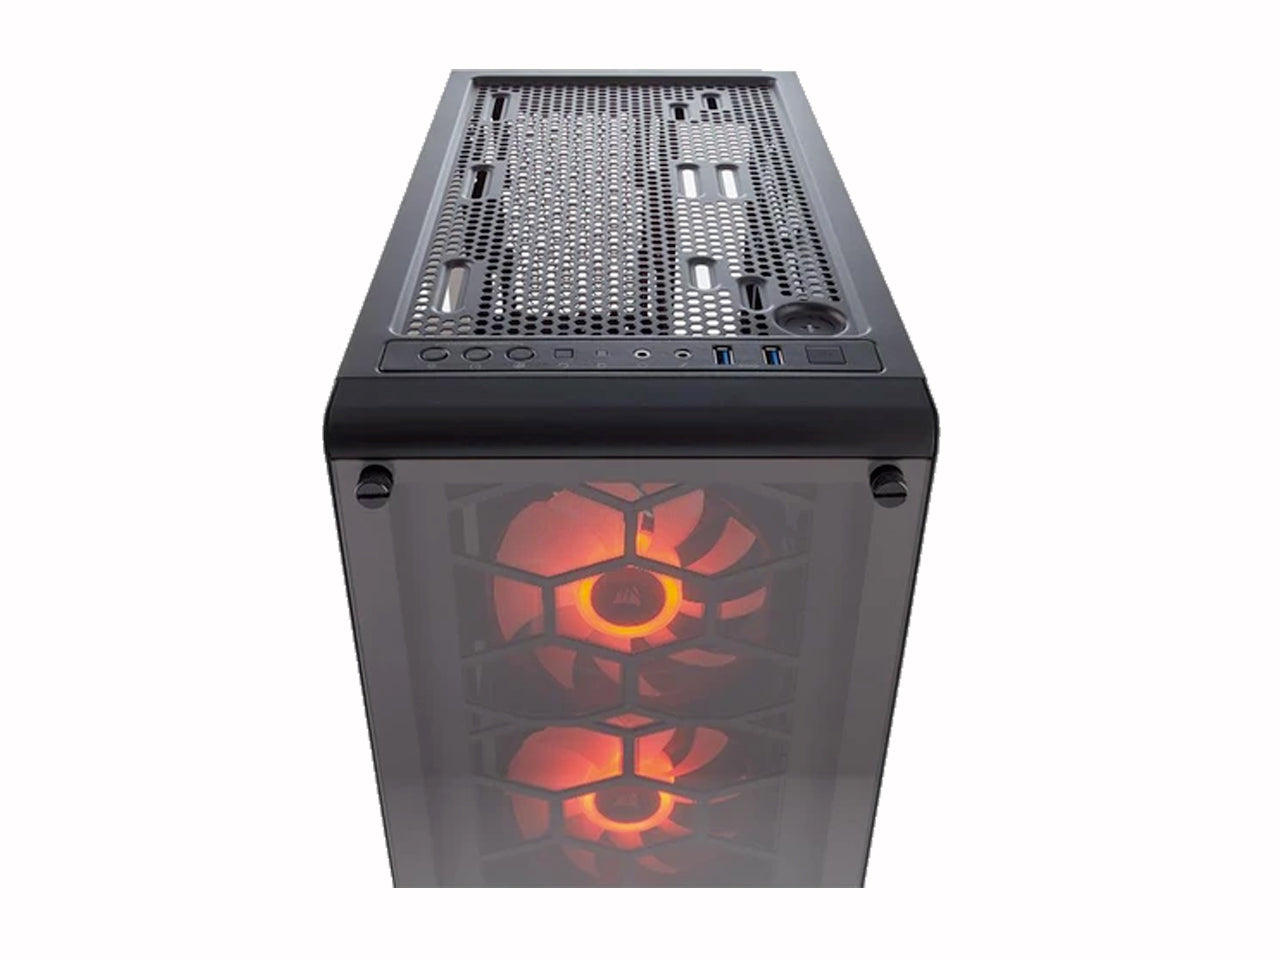 CORSAIR CRYSTAL SERIES 460X BLACK RGB MID TOWER TEMPERED GLASS CABINET